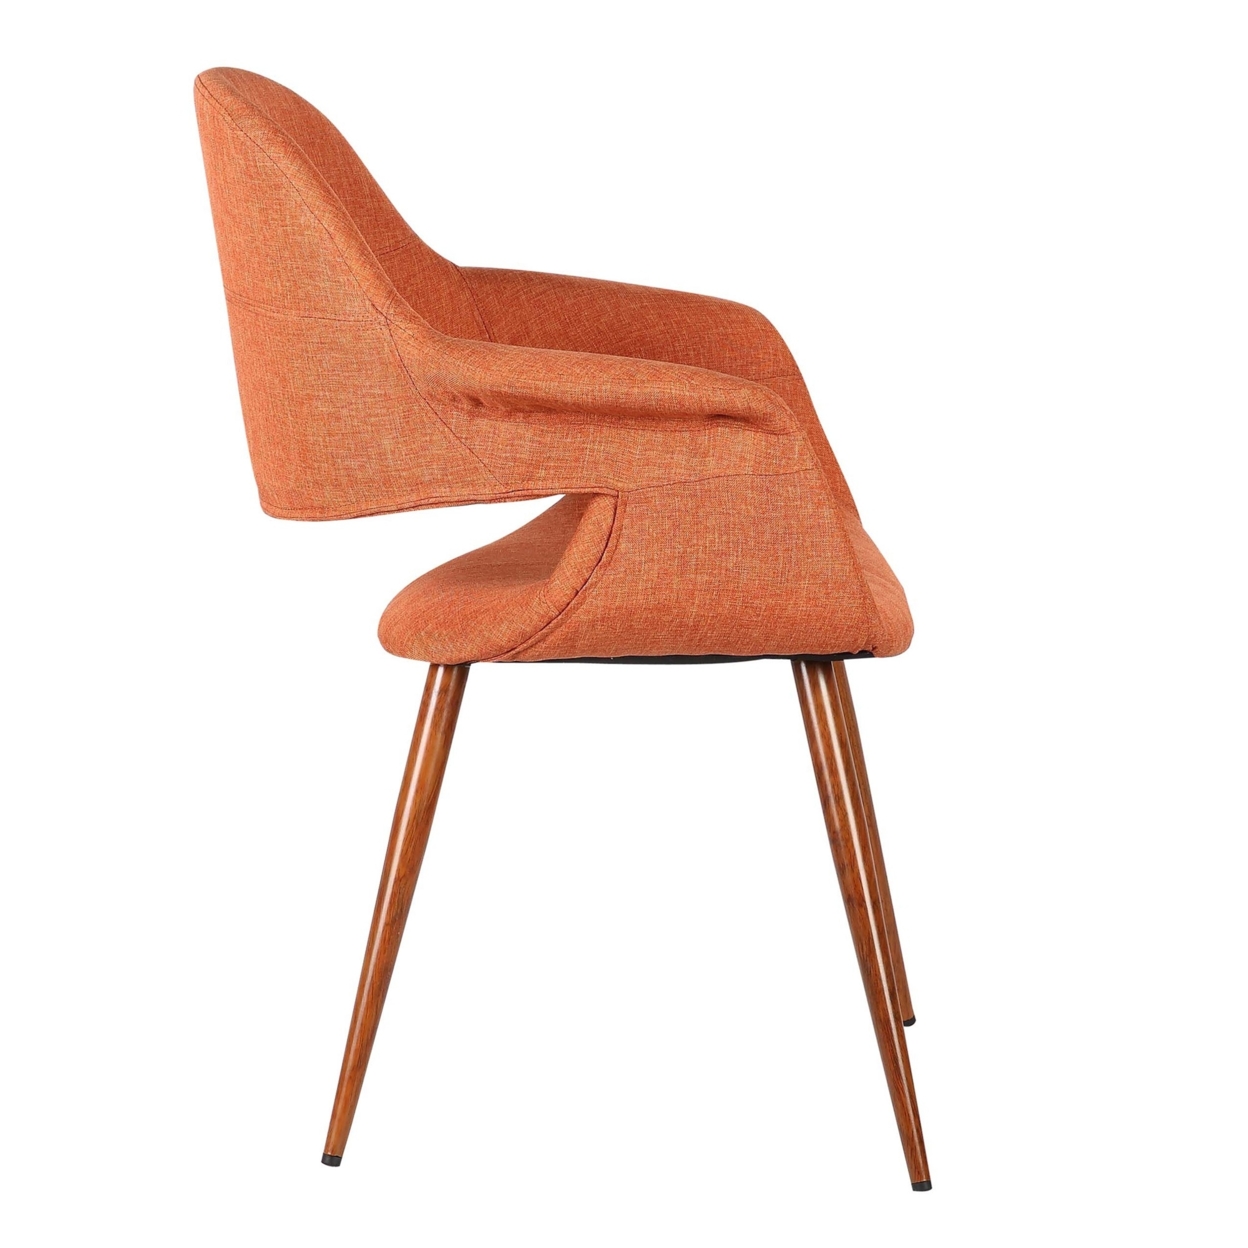 Fabric Mid Century Dining Chair With Round Tapered Legs, Orange And Brown- Saltoro Sherpi